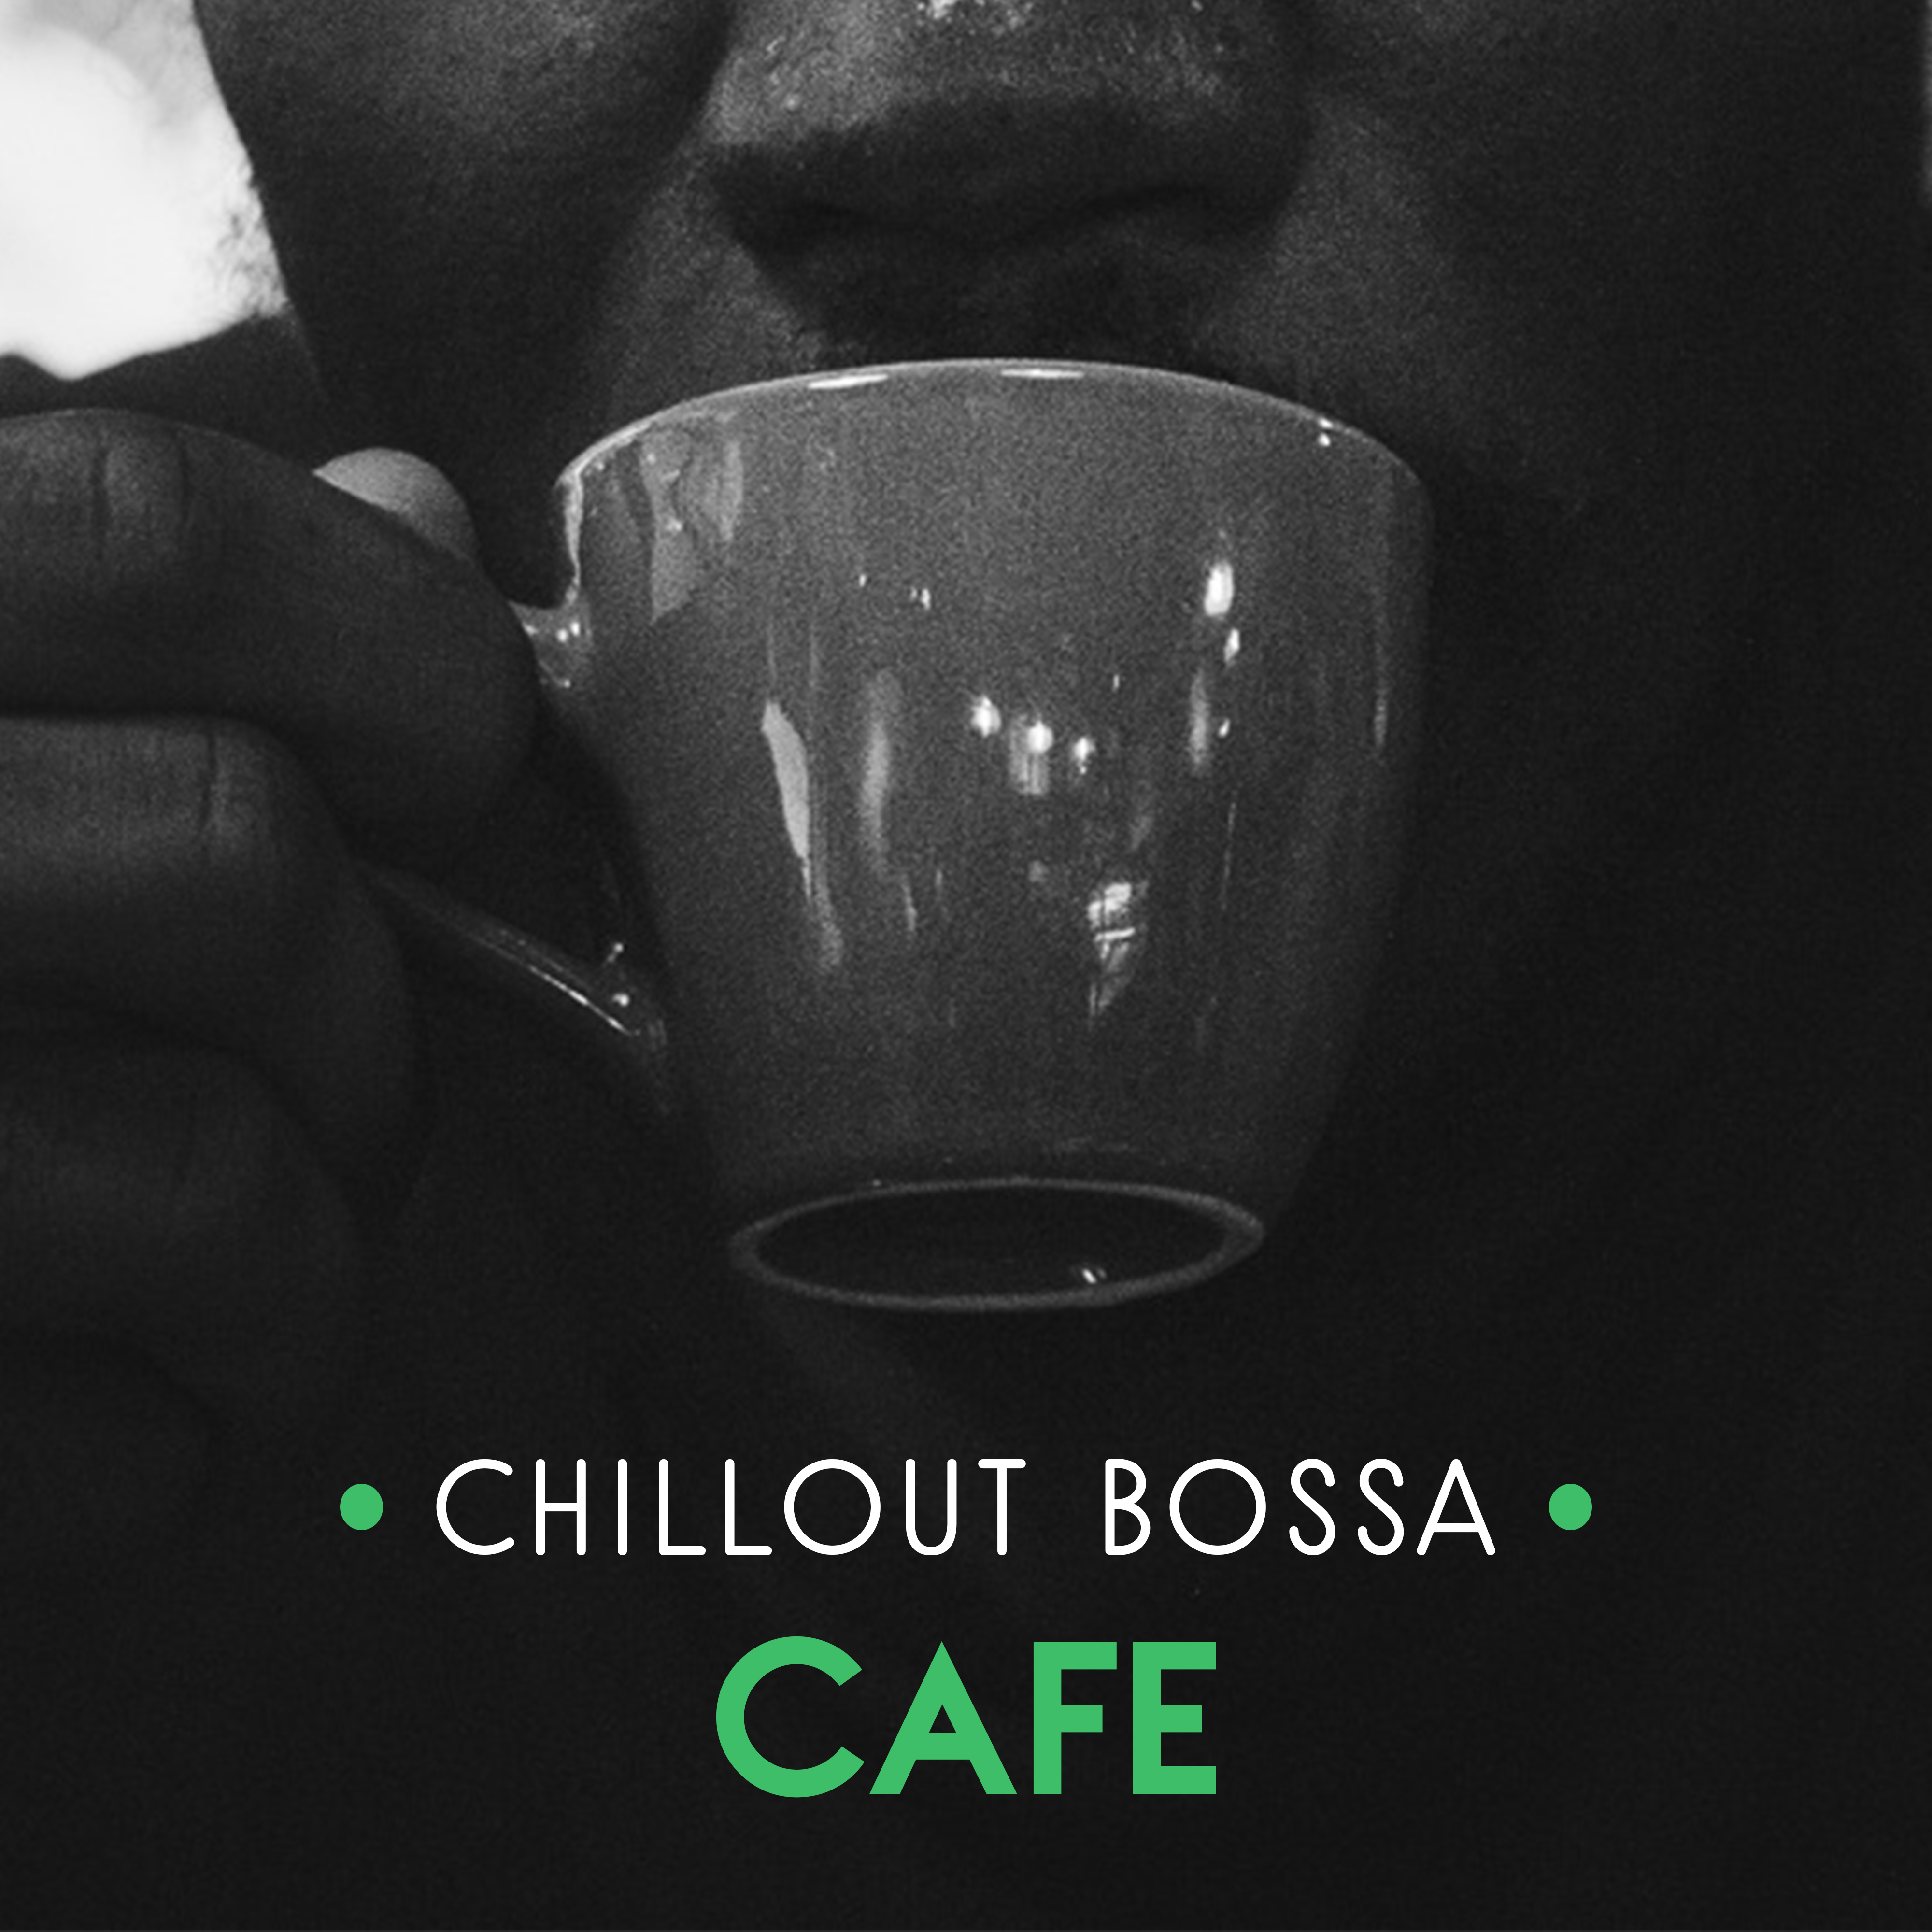 Chillout Bossa Cafe – Smooth Chillout Compilation, Relaxed Vibrations, Chill Out 2017